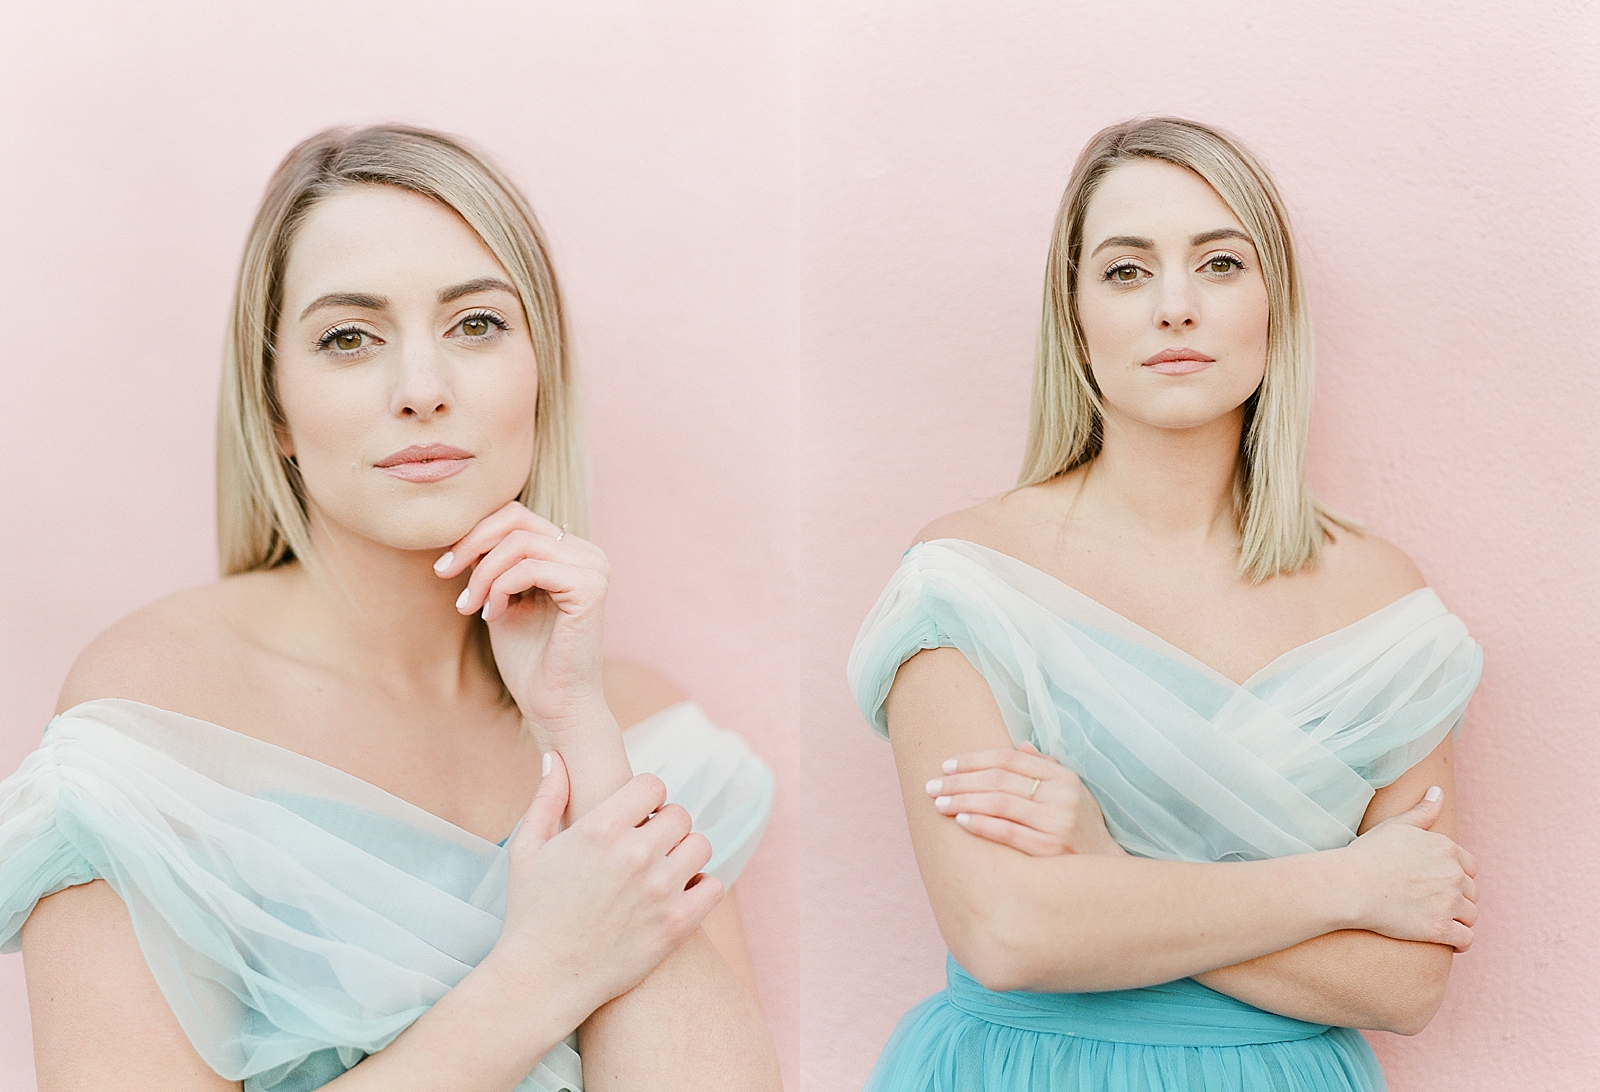 Jamie in Vintage Blue Dress Leaning against Pink Wall Photos 